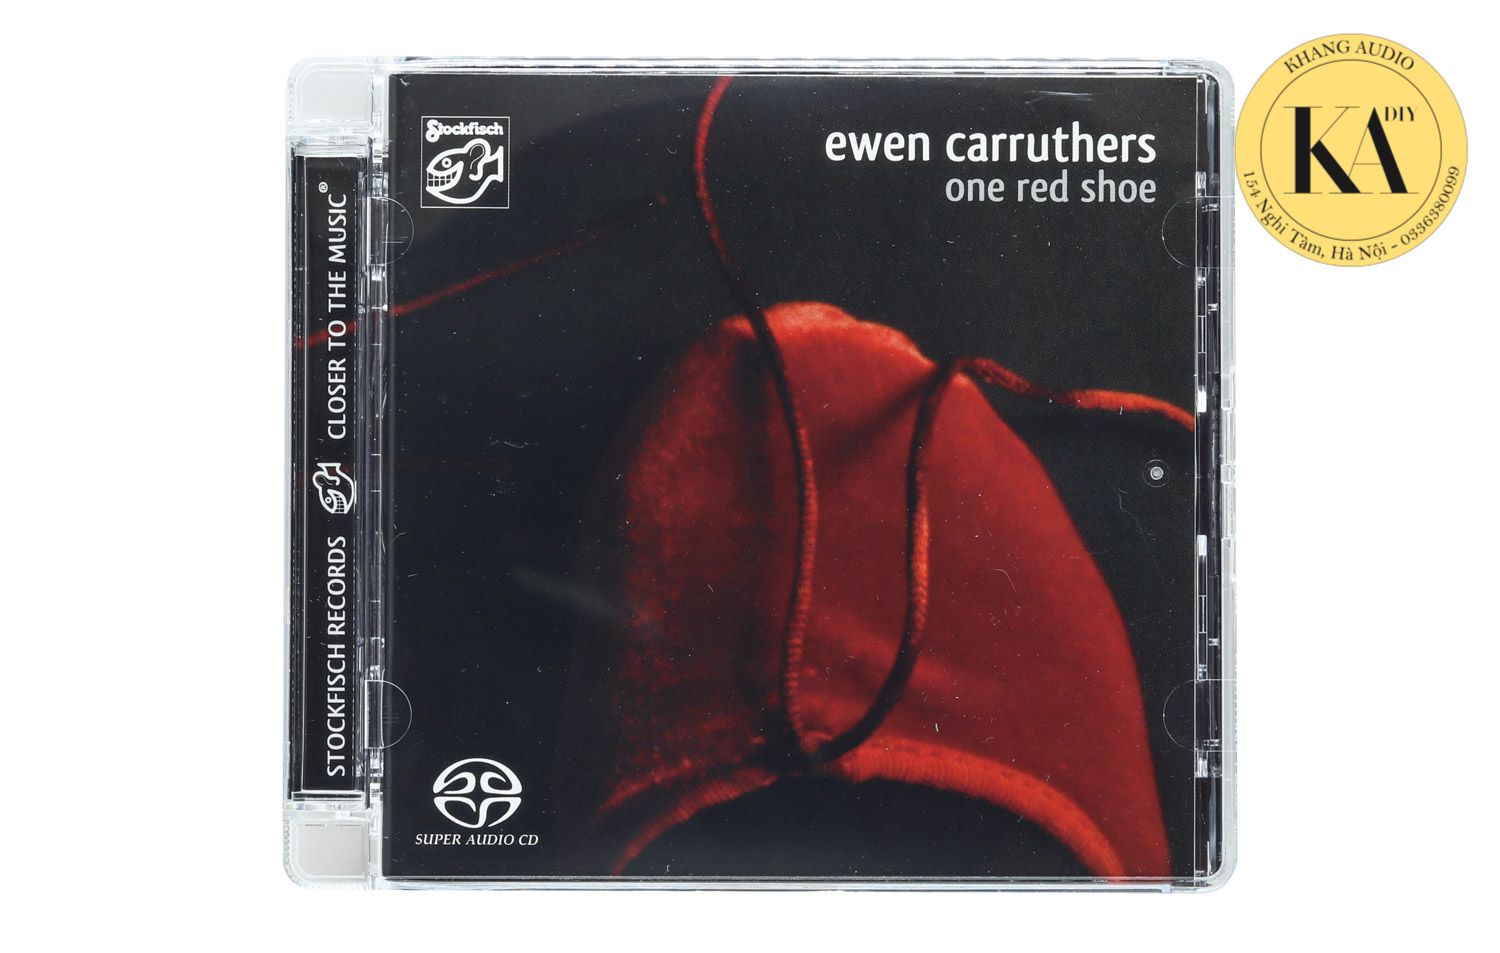 SACD One Red Shoe - Ewen Carruthers  Khang Audio 0336380099